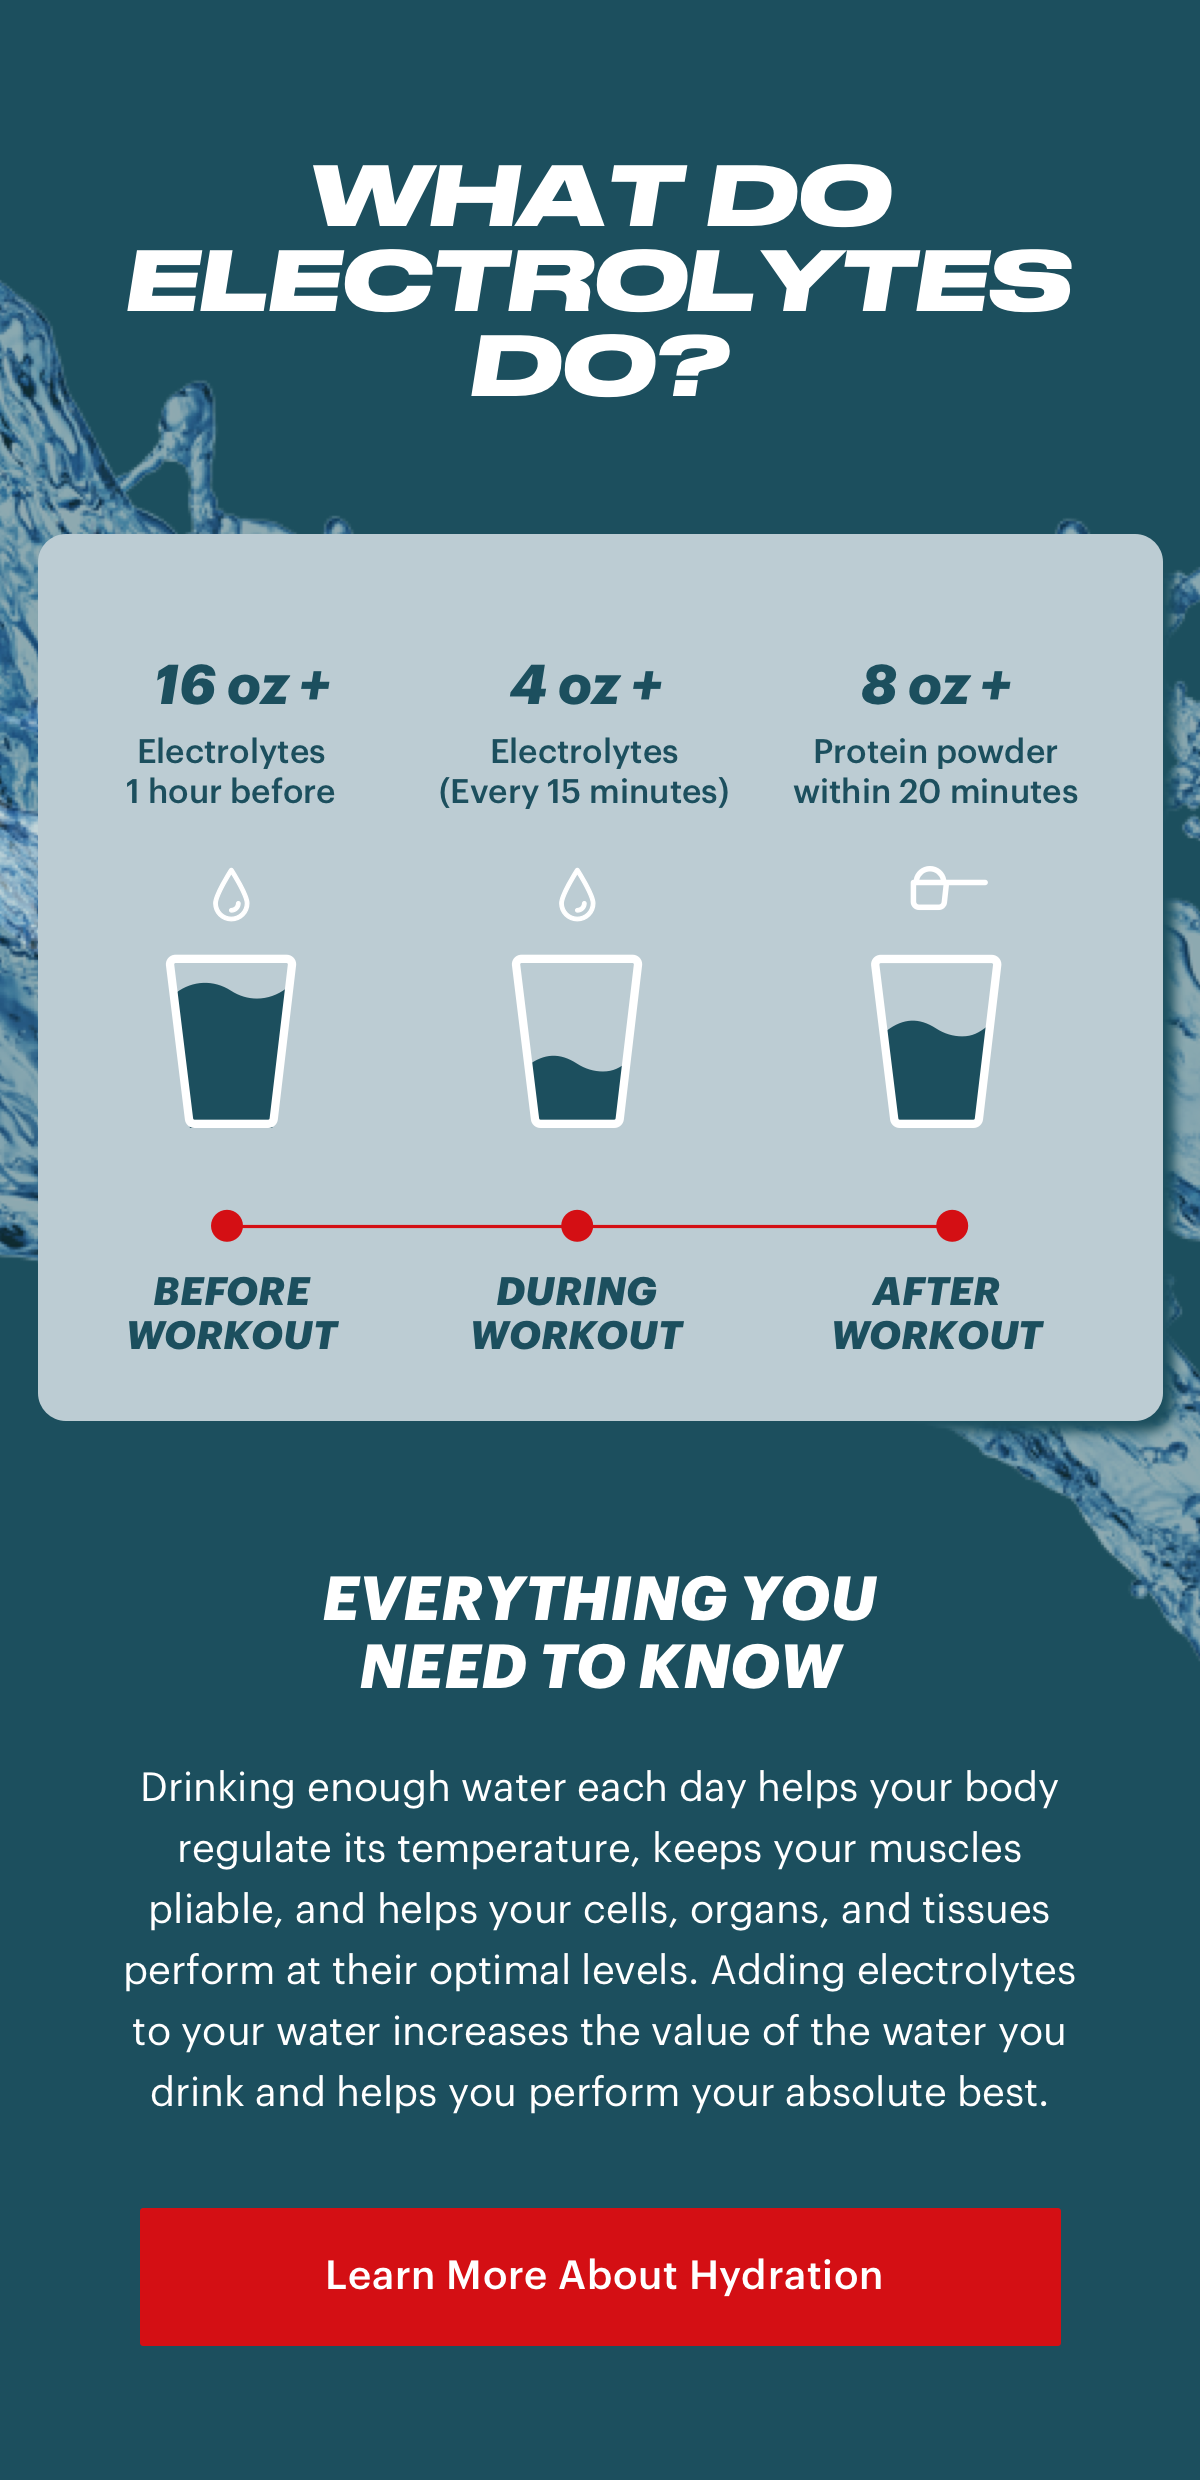 Learn More About Hydration